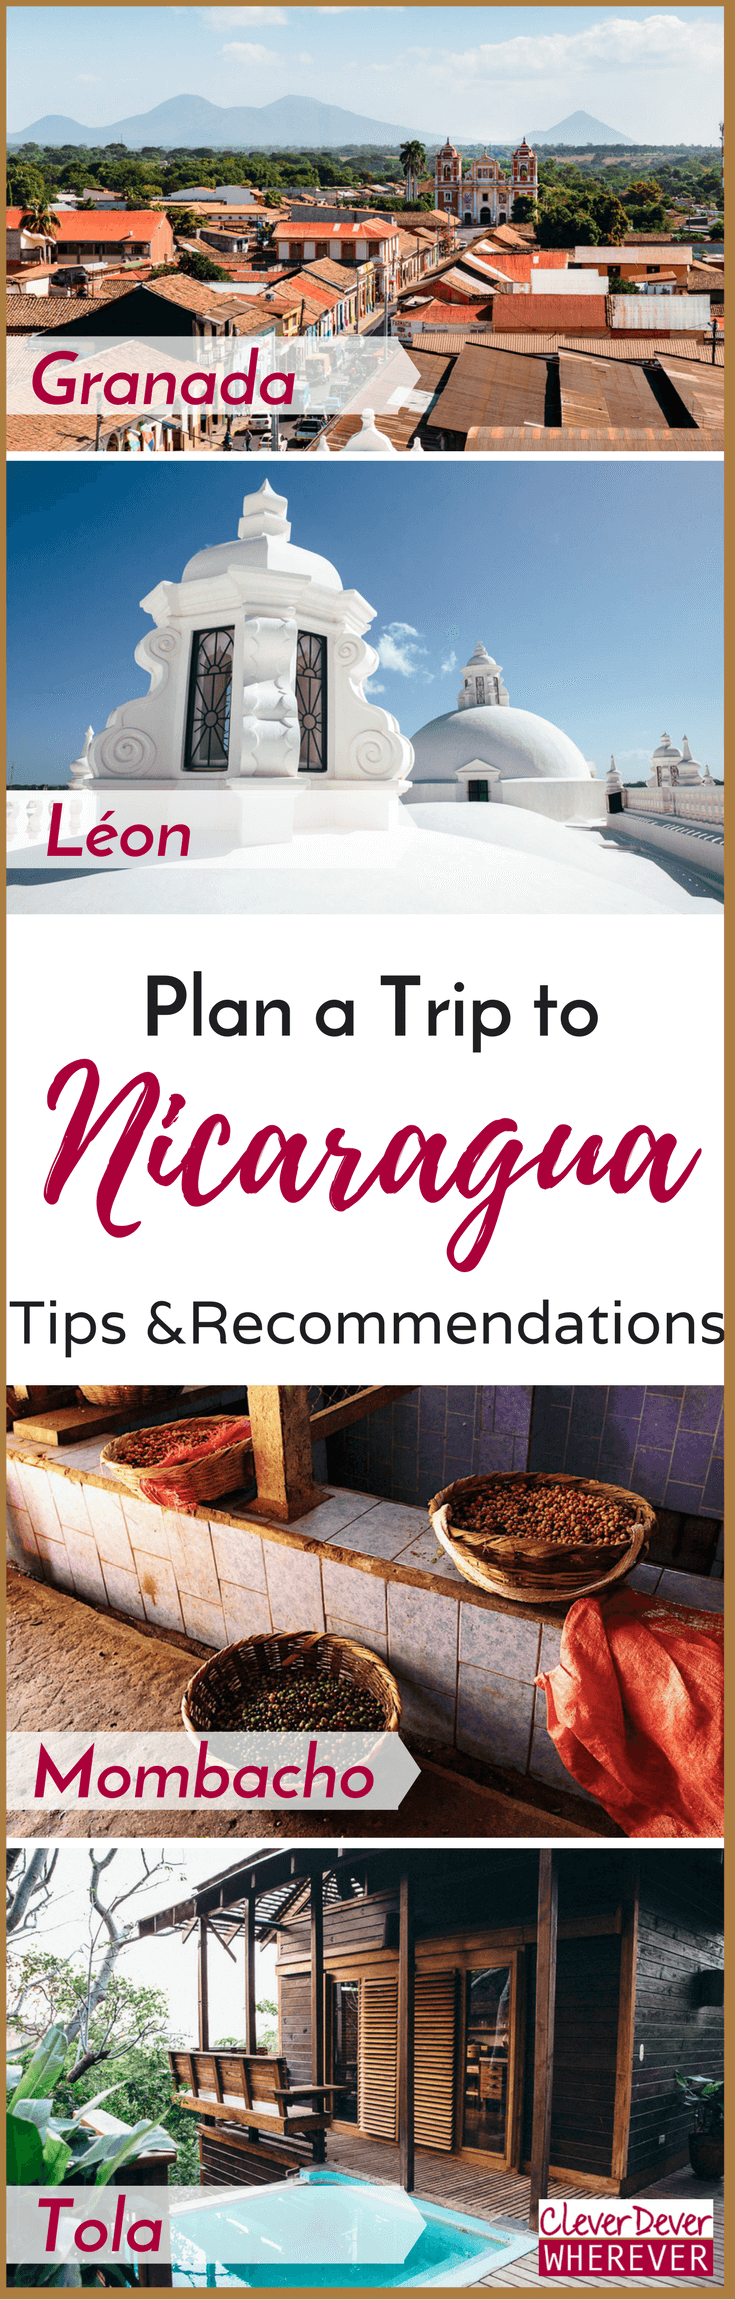 Sharing the best recommendations and travel tips based on firsthand experience in this Nicaragua travel guide for your next warm weather getaway.